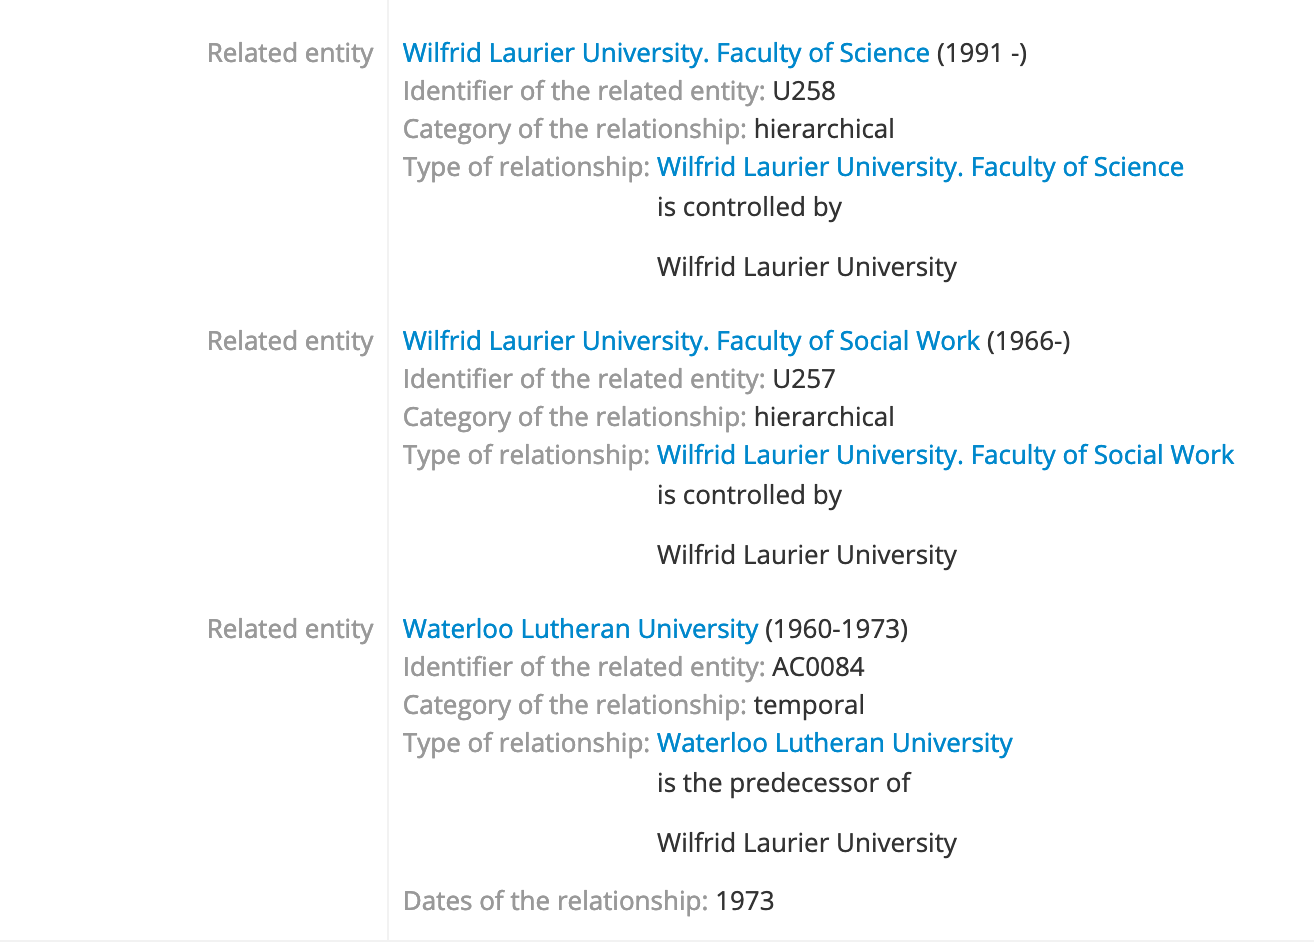 A predecessor relationship with Wilfrid Laurier University